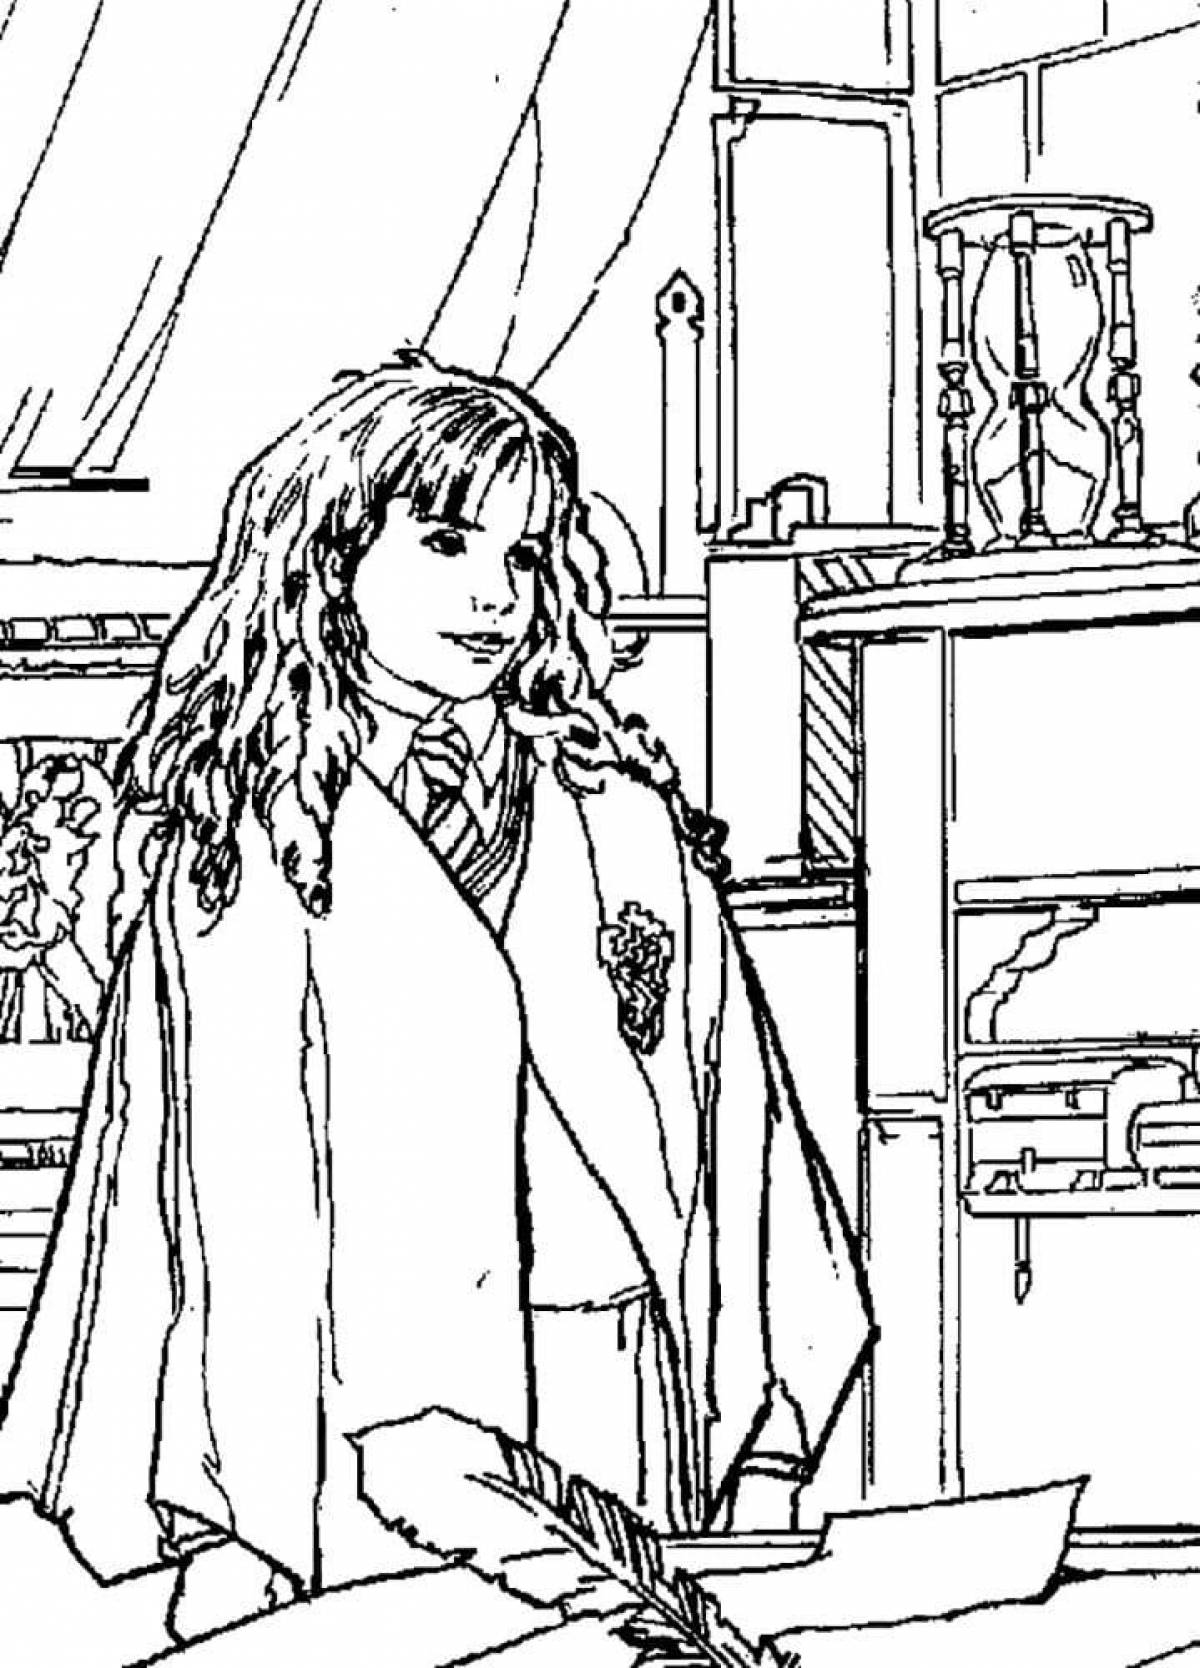 Incredible harry potter coloring book for kids